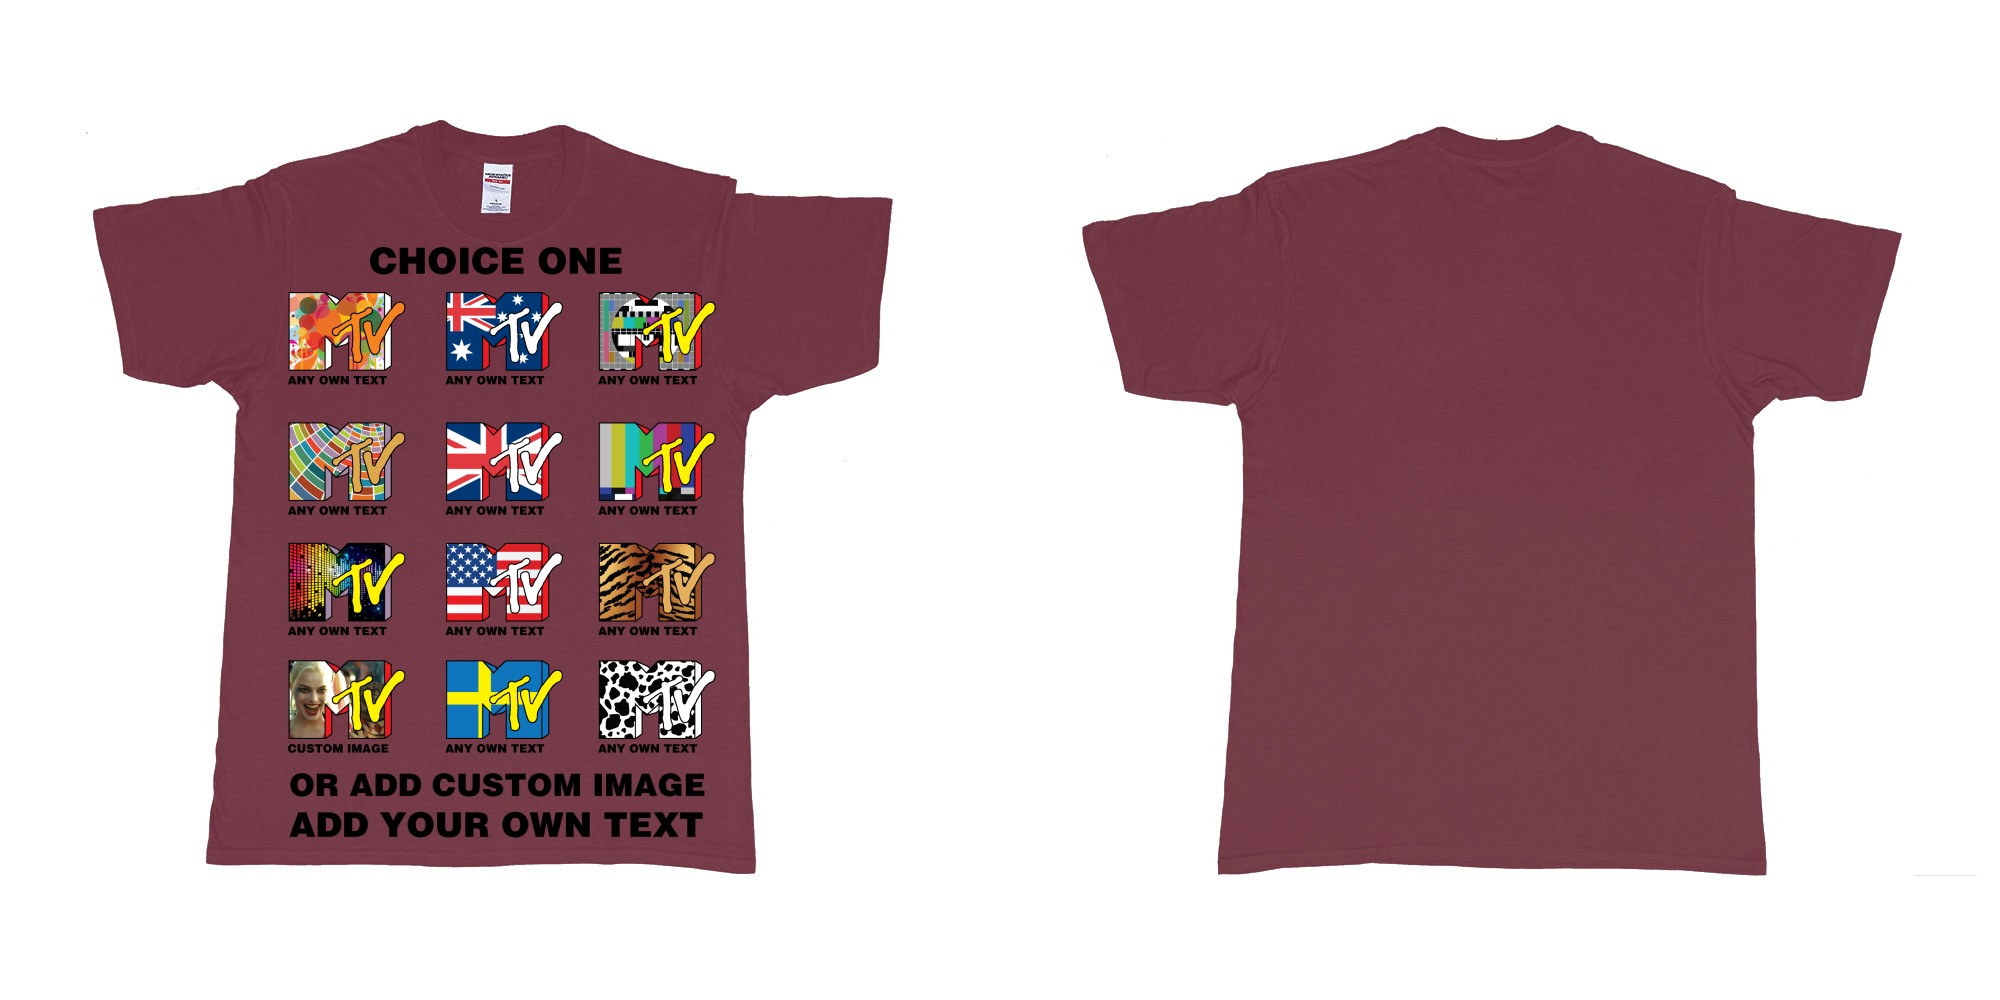 Custom tshirt design mtv logo choice any background text print in fabric color marron choice your own text made in Bali by The Pirate Way